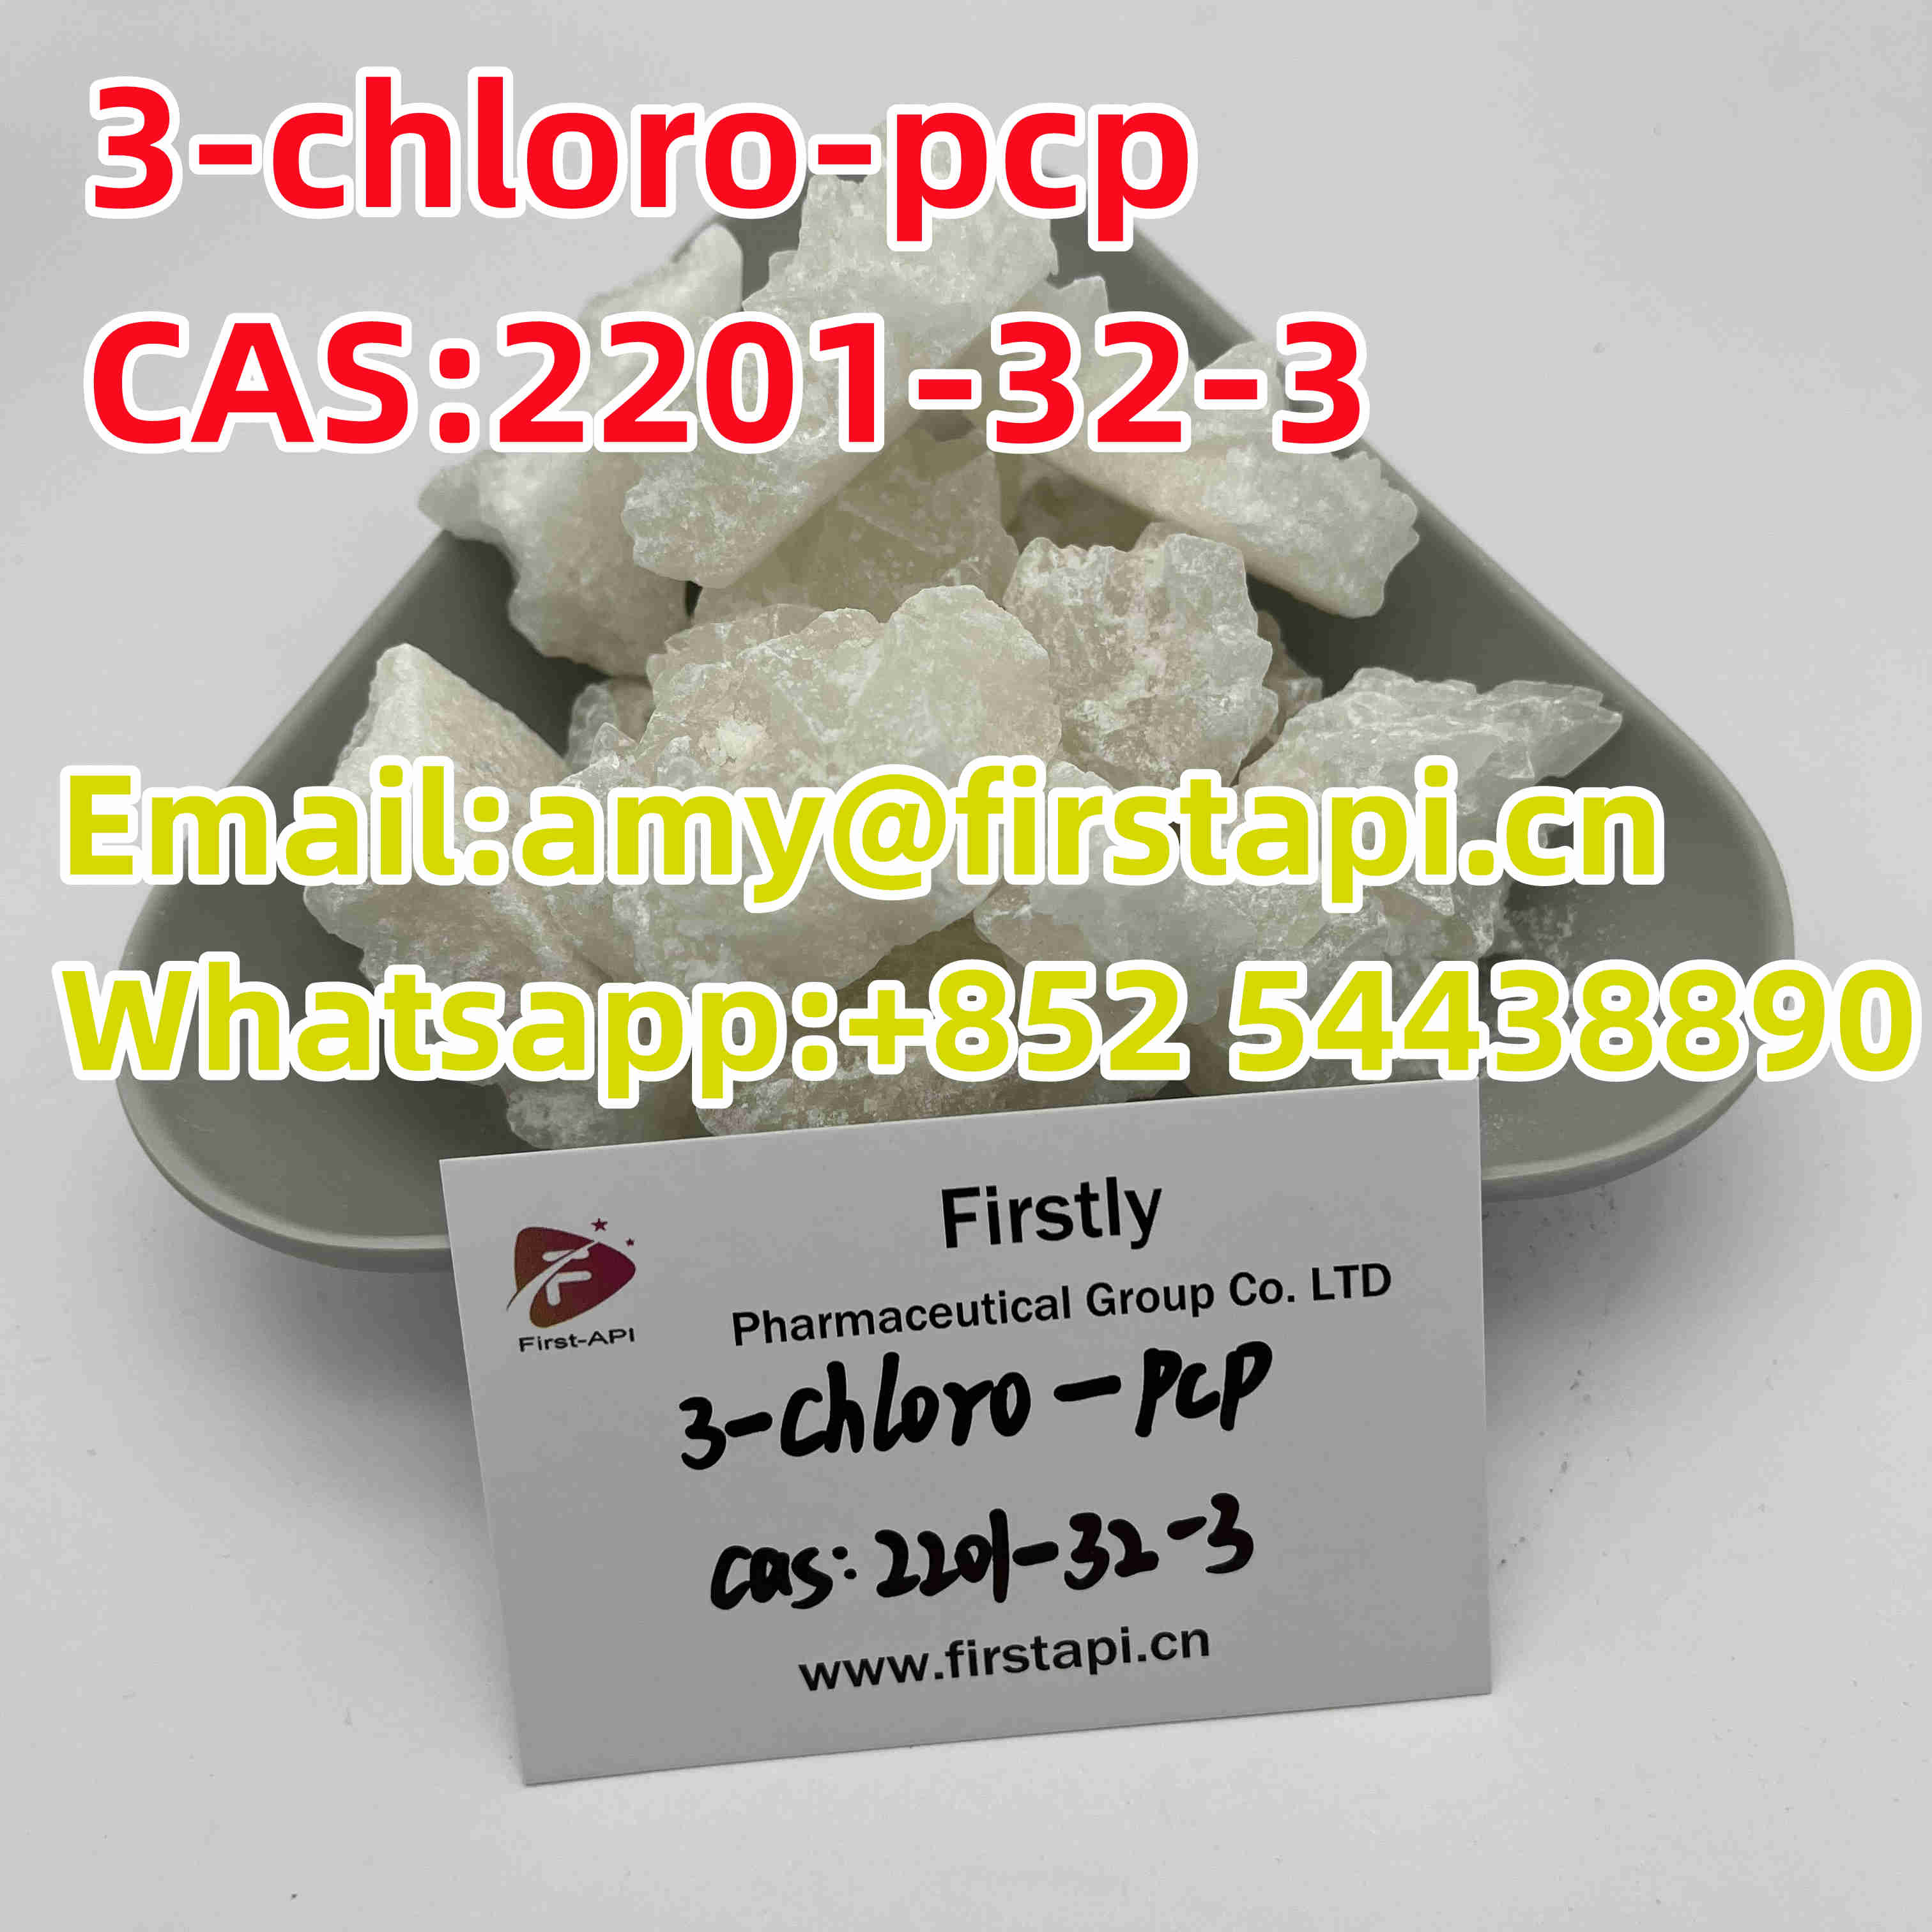 Chemical Name: Piperidine,CAS No.: 2201-32-3,Whatsapp:+852 54438890,made in china - photo